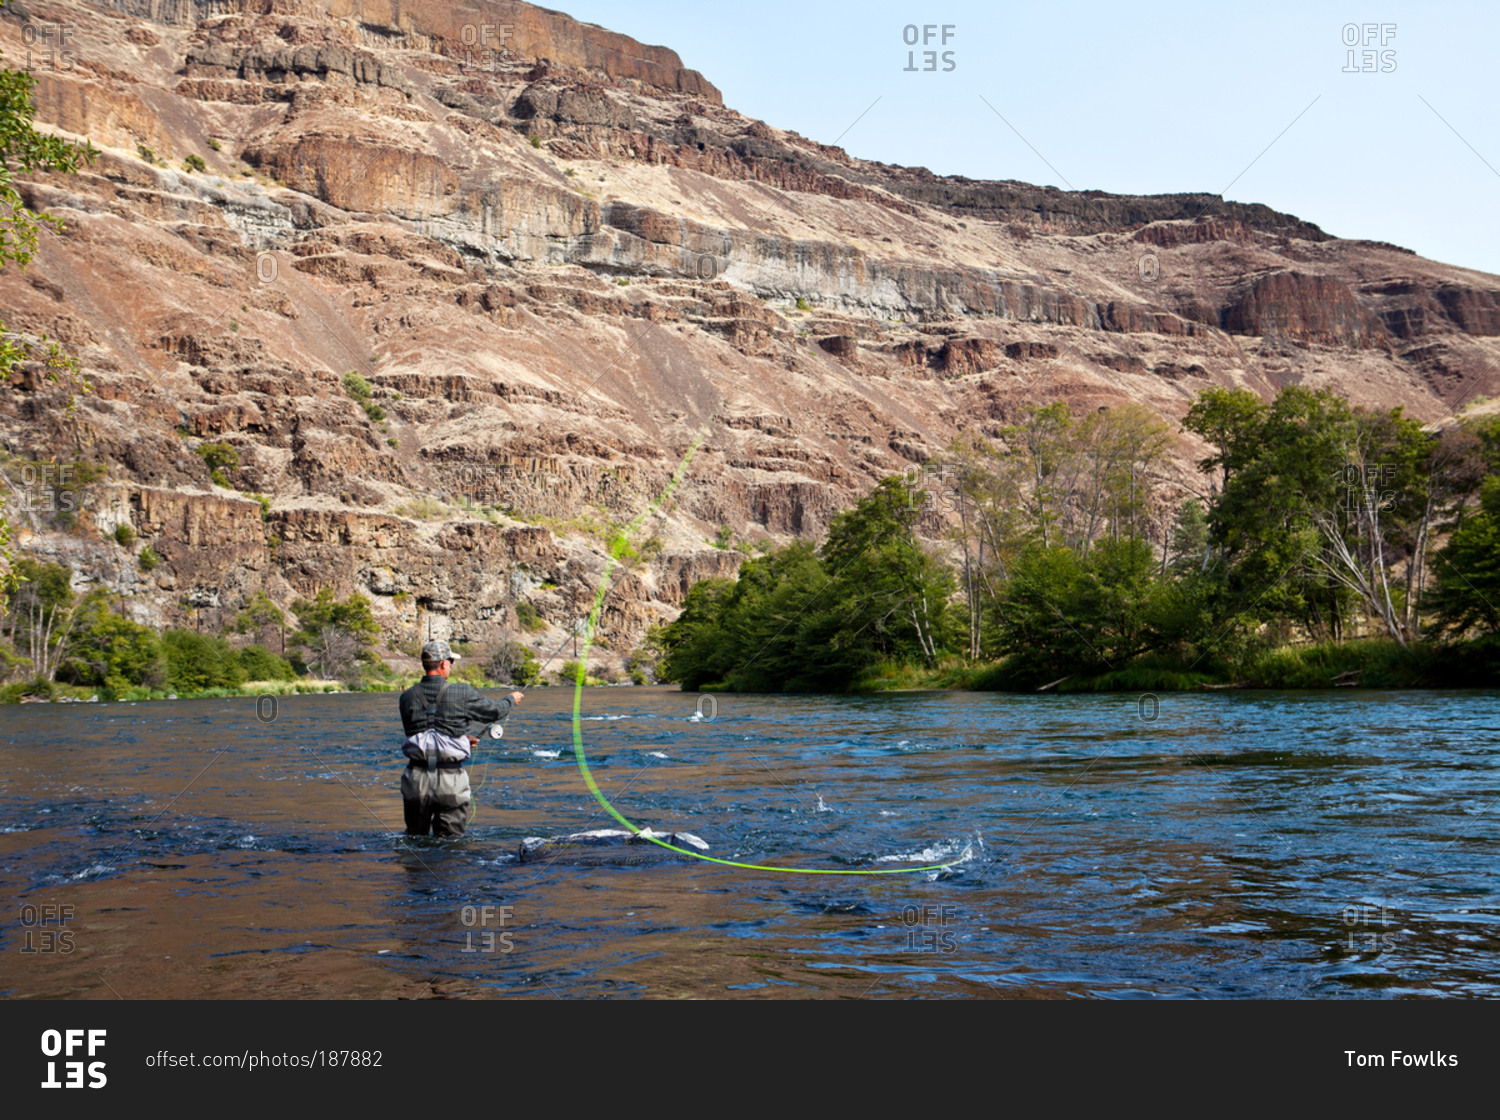 A man casts off in a canyon river